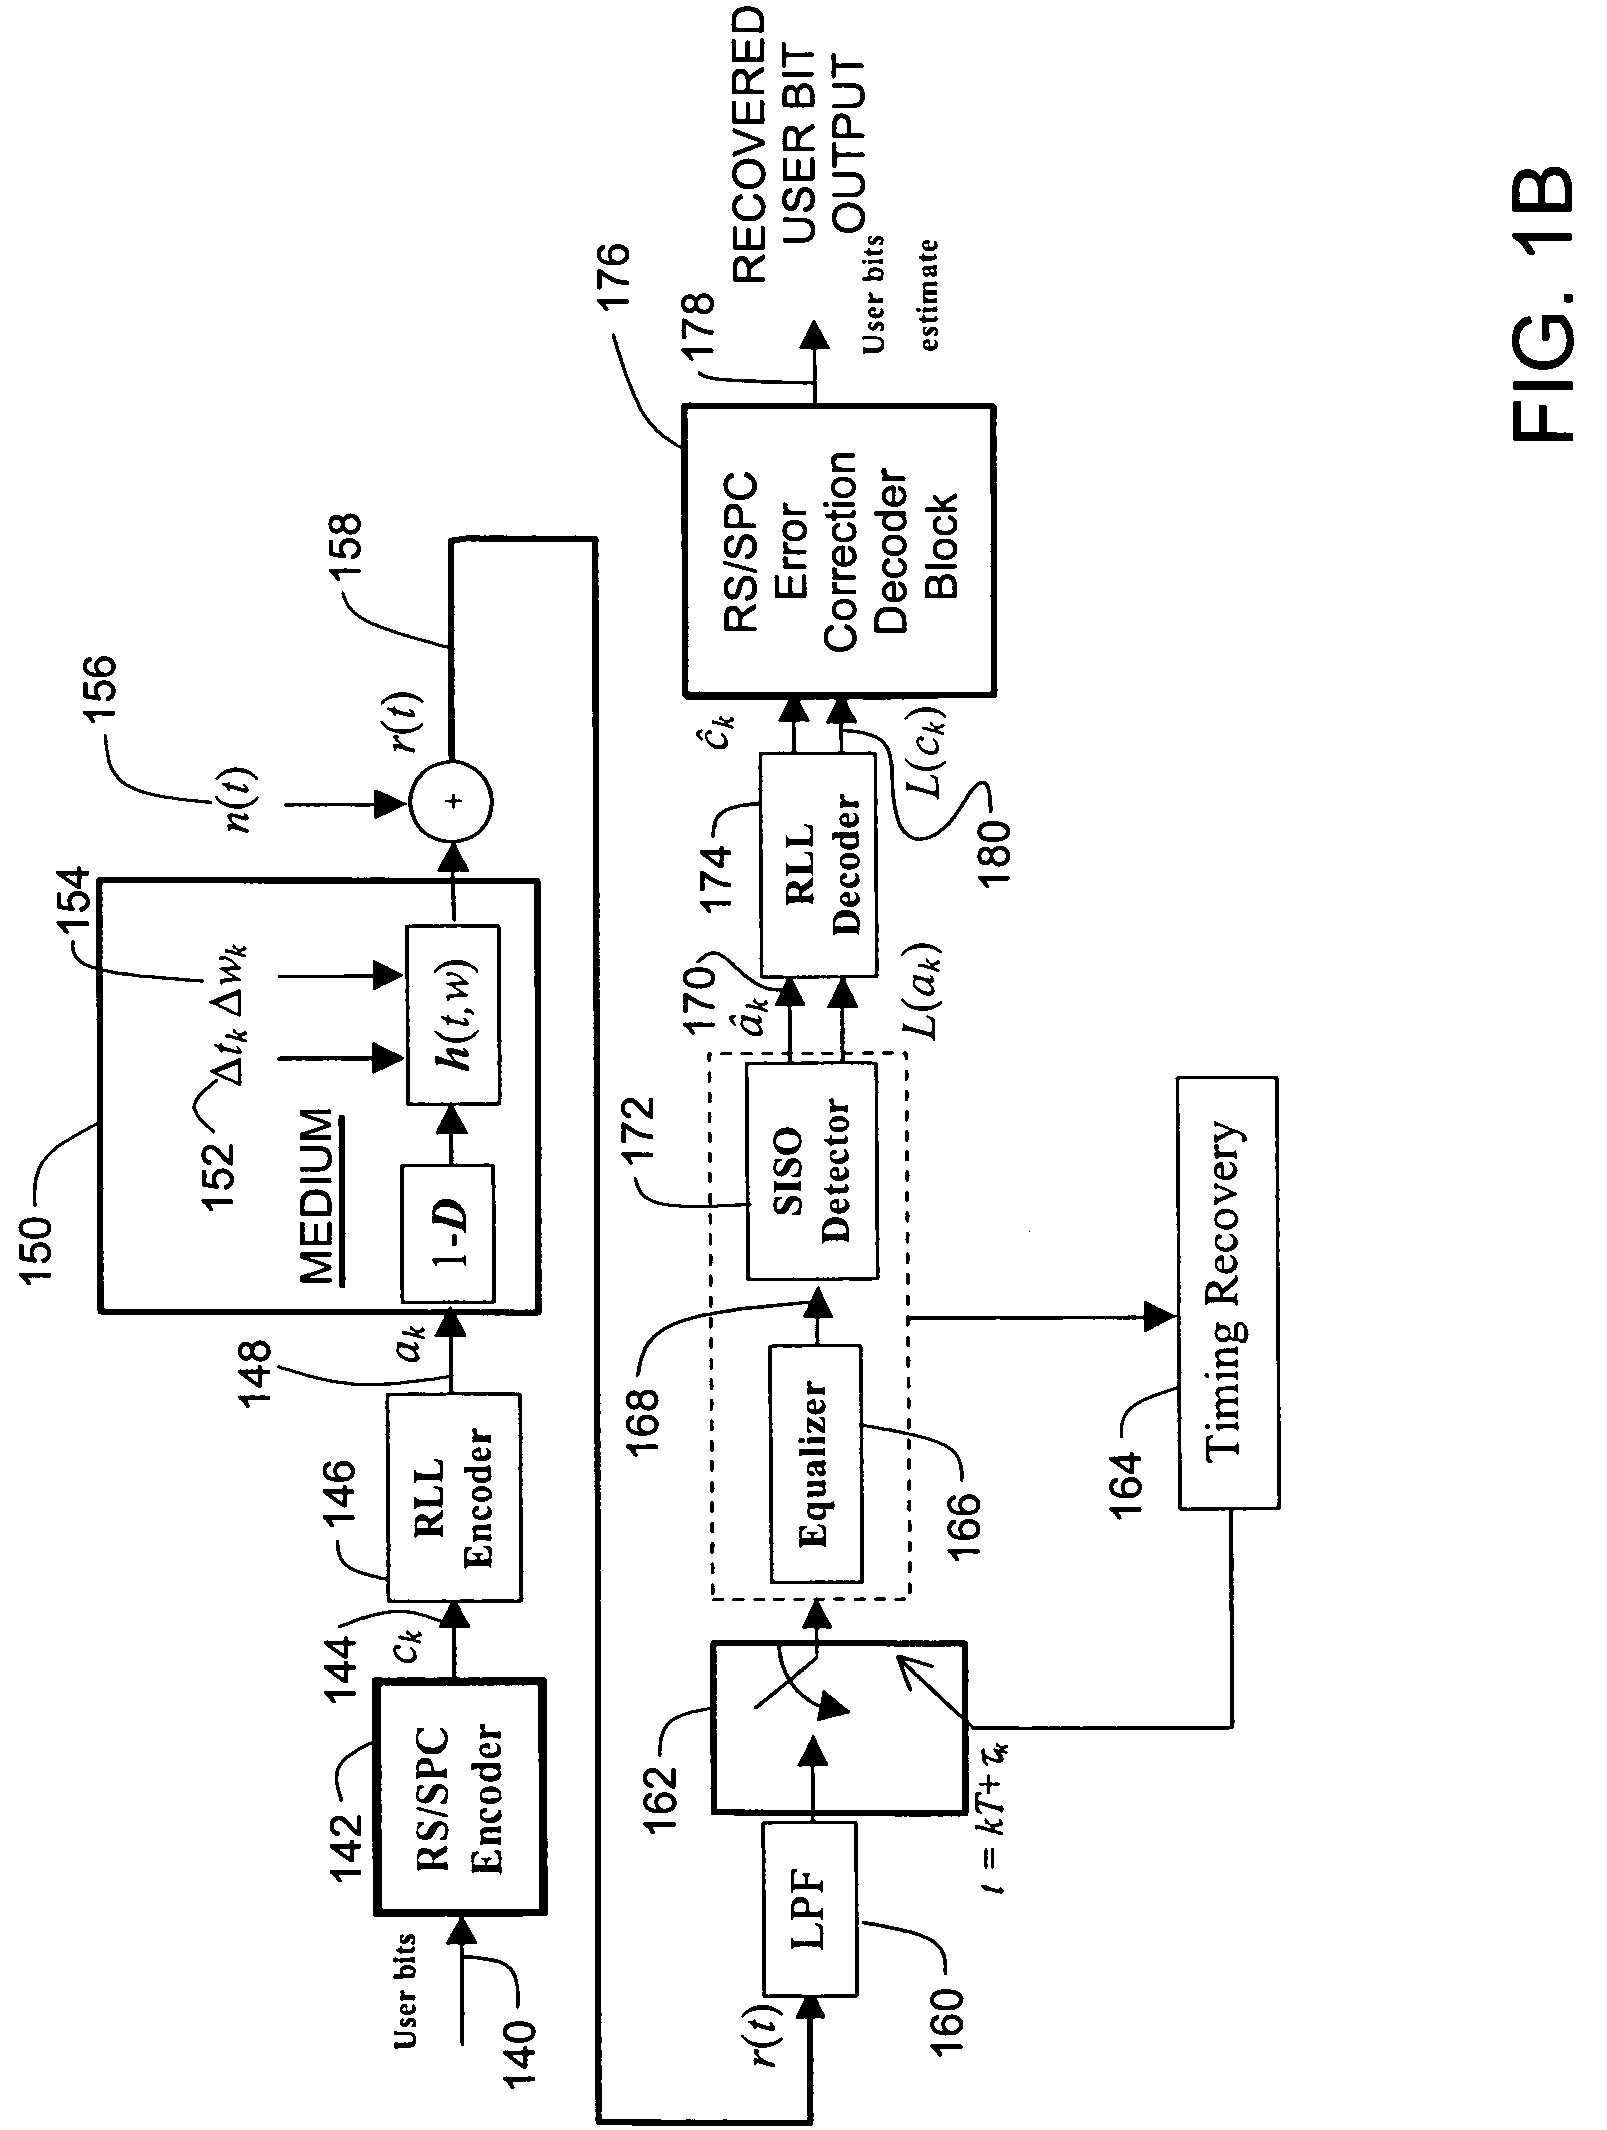 Communication channel with Reed-Solomon encoding and single parity check